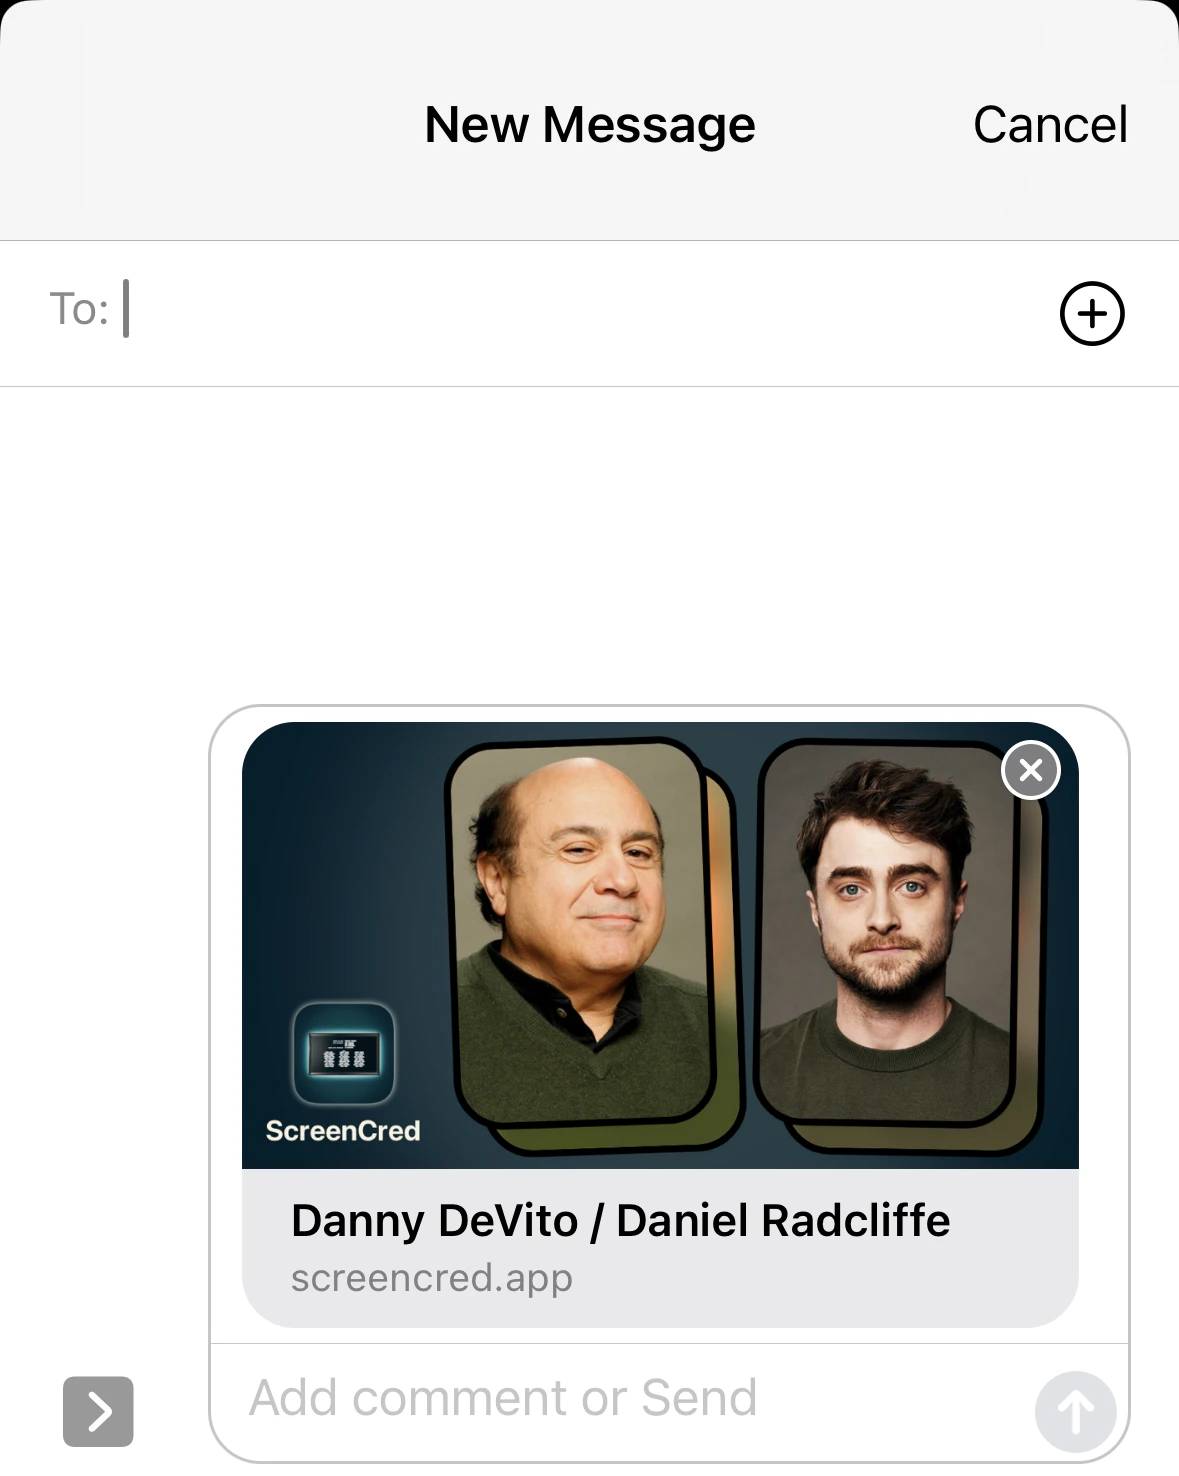 An iOS new message composition sheet with a link to ScreenCreed. The preview image shows Danny DeVito and Daniel Radcliffe.